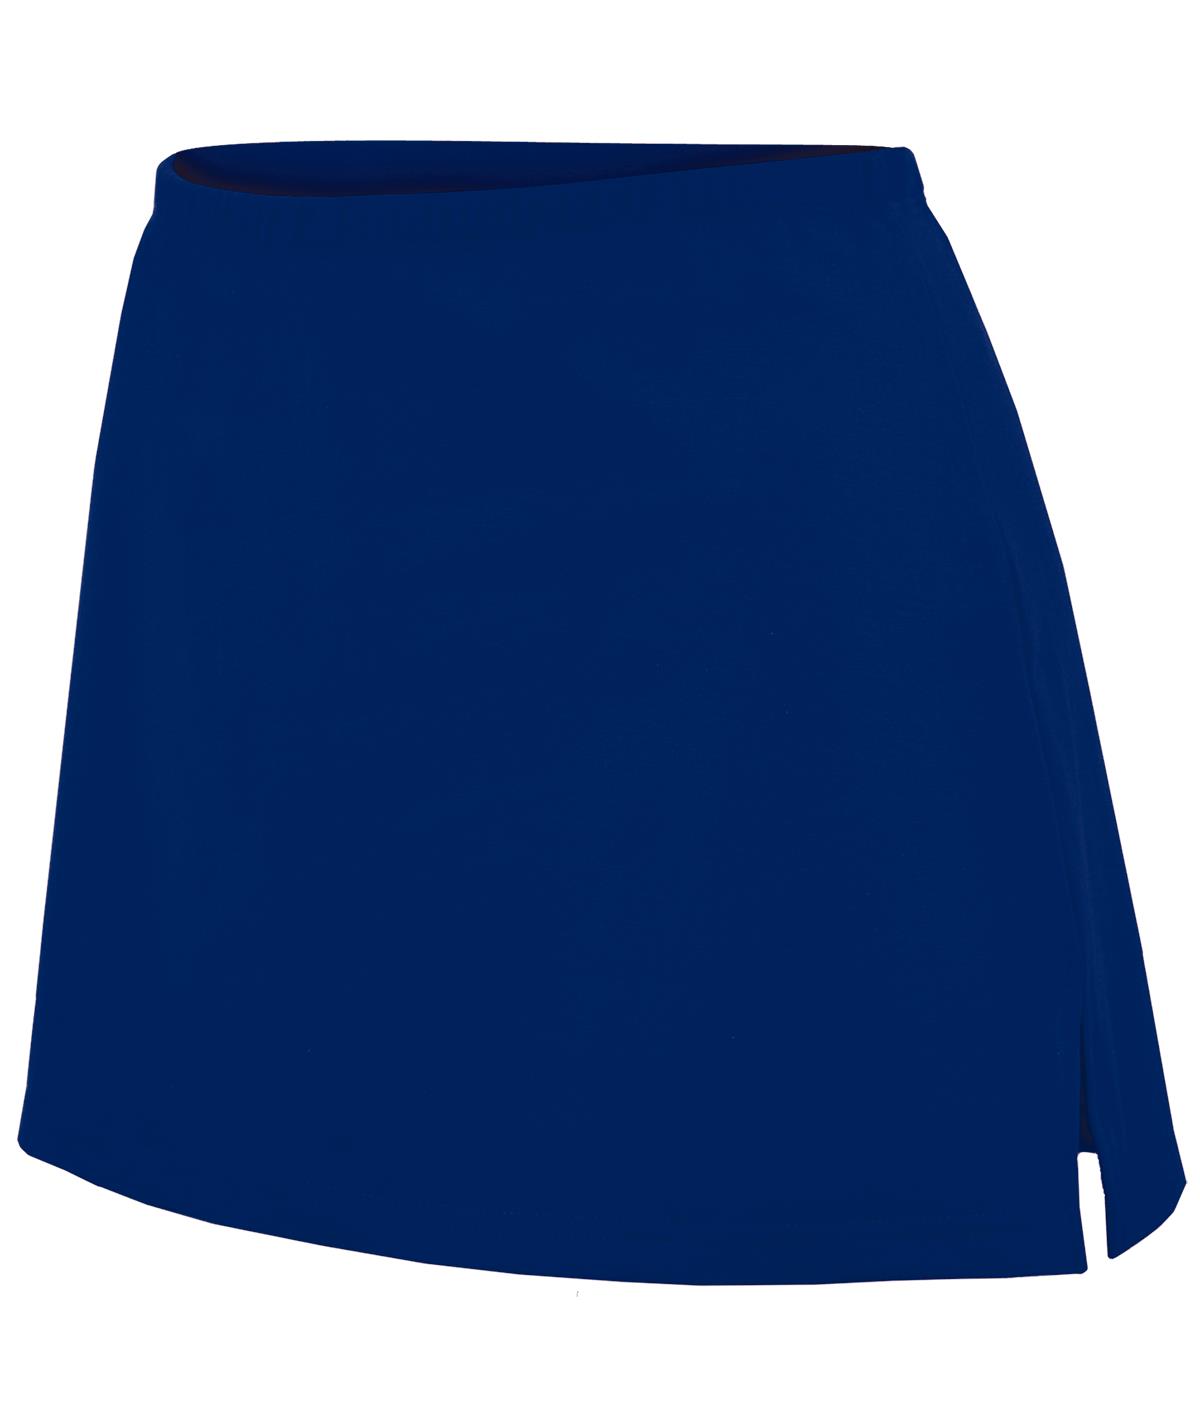 Chasse Skirt with Built-In Short